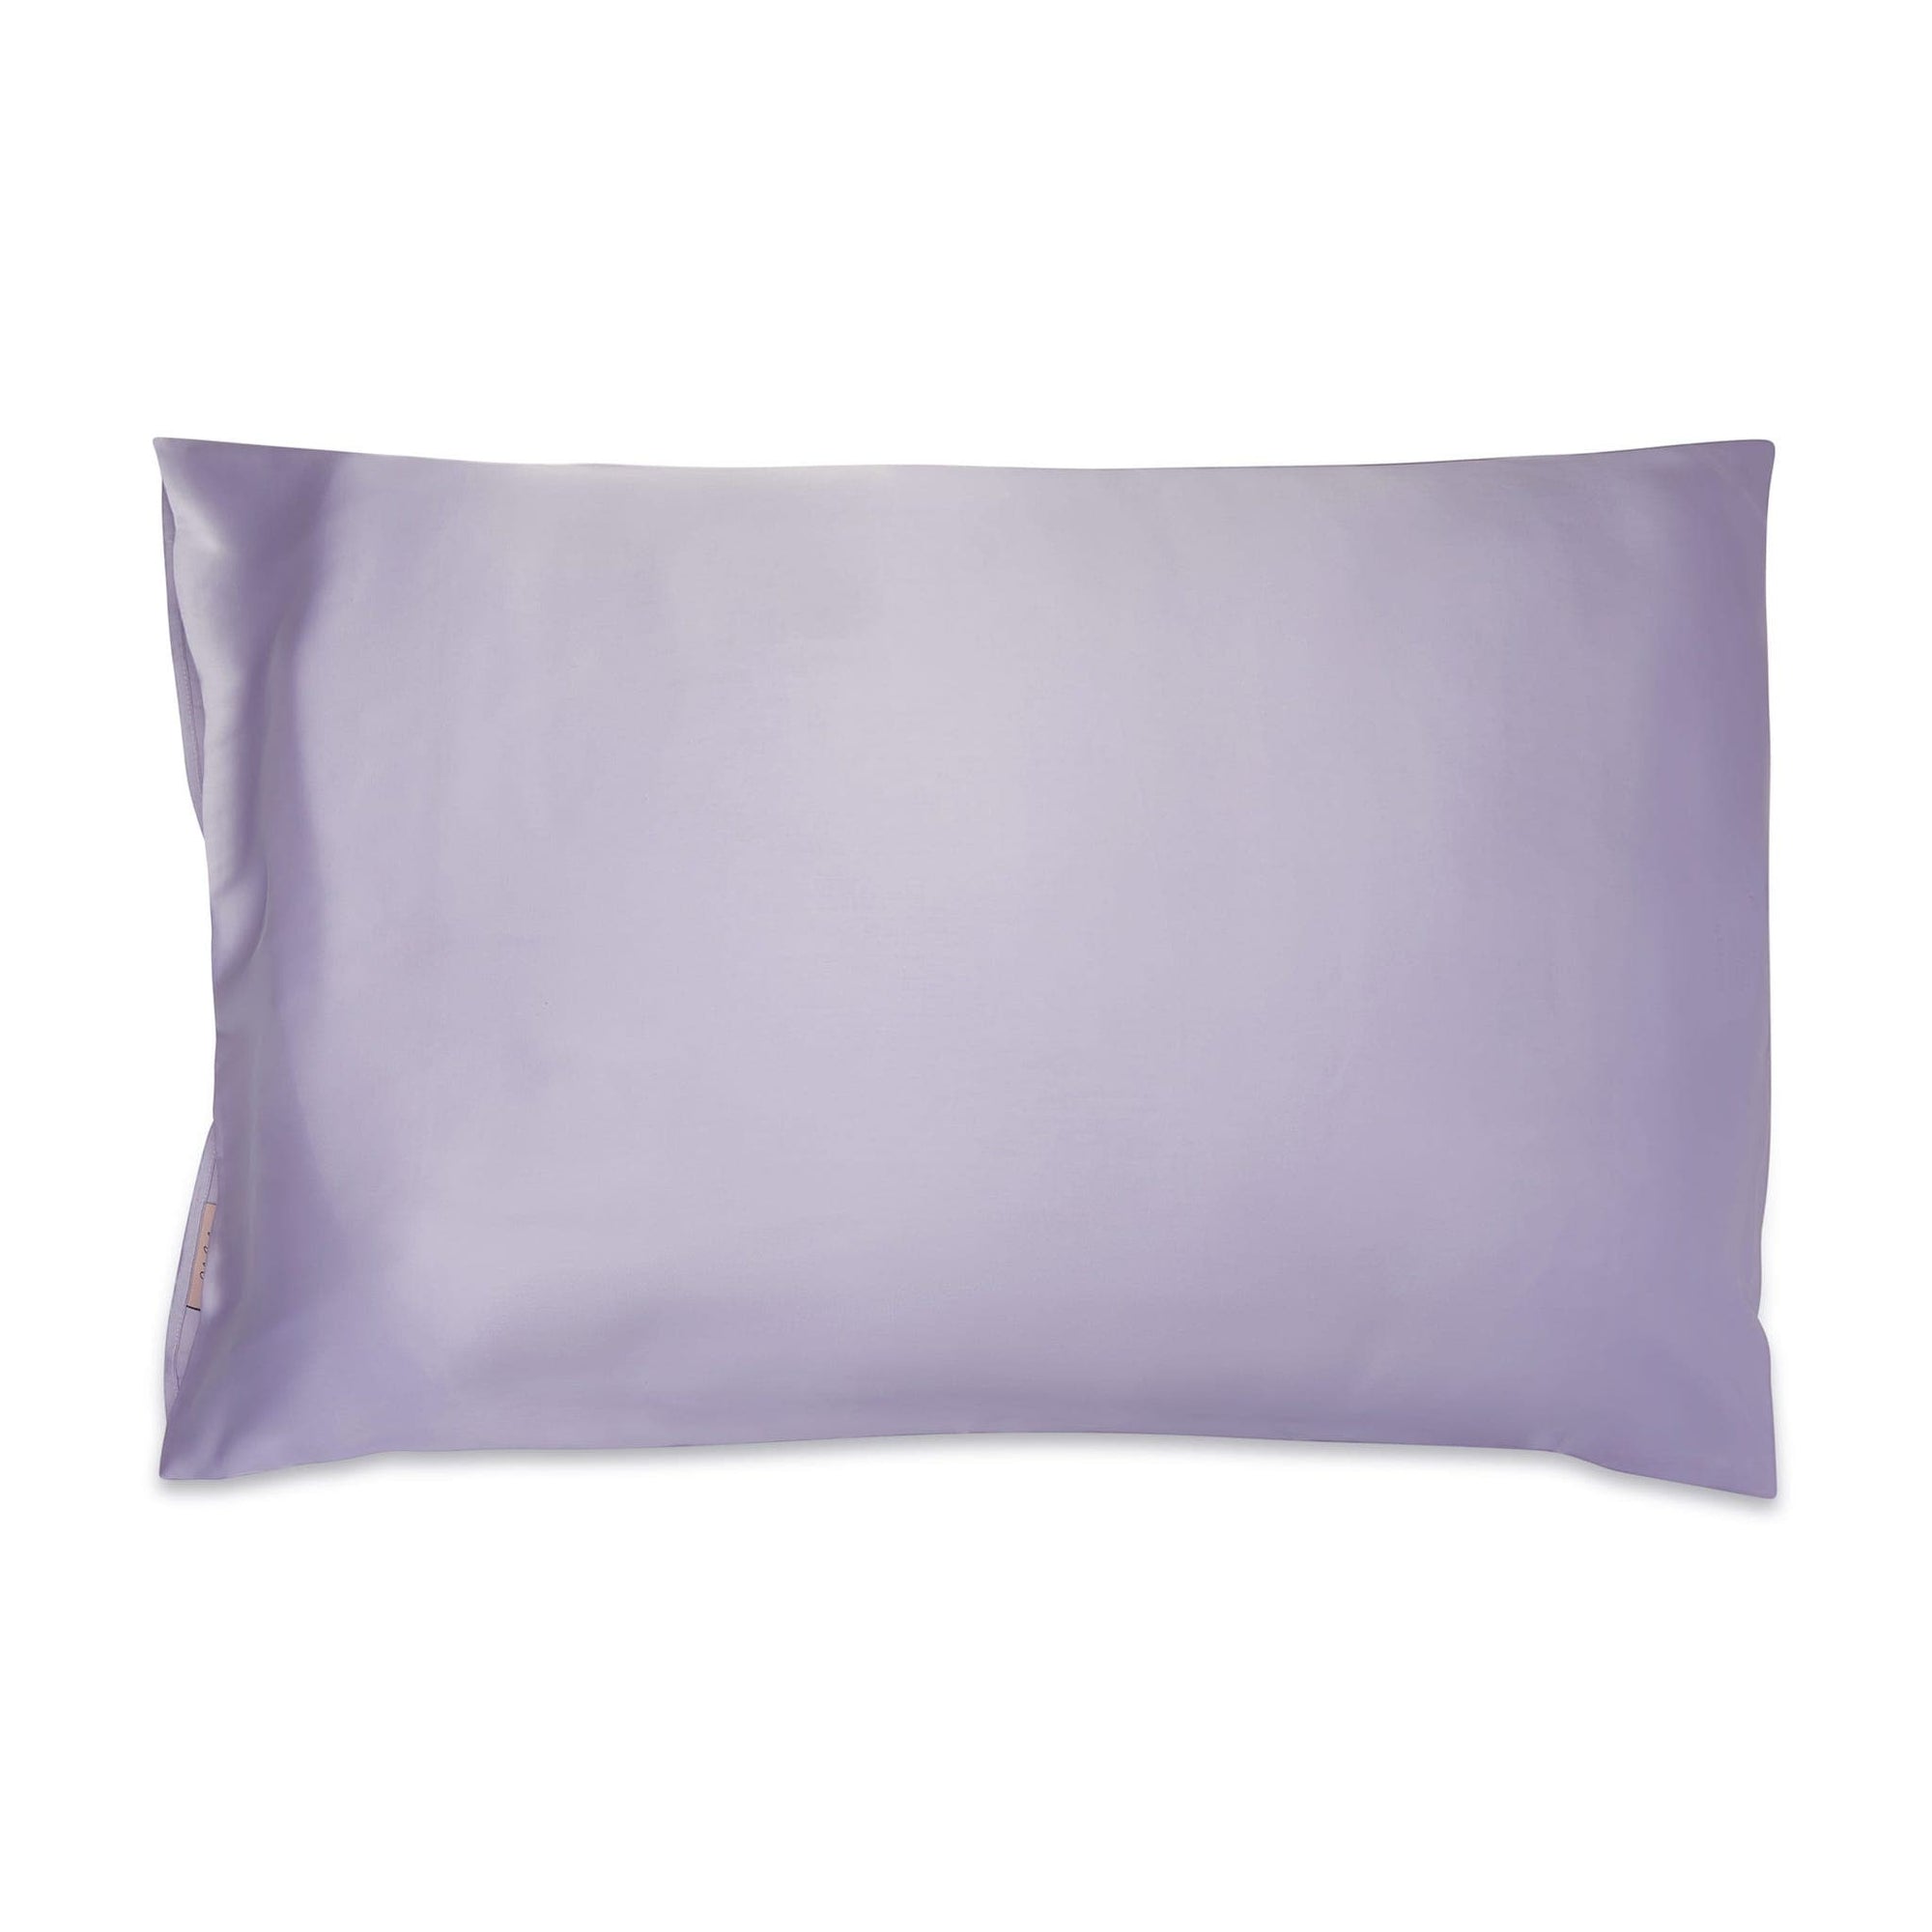 Only Curls Satin Pillowcase - Lilac - Only Curls